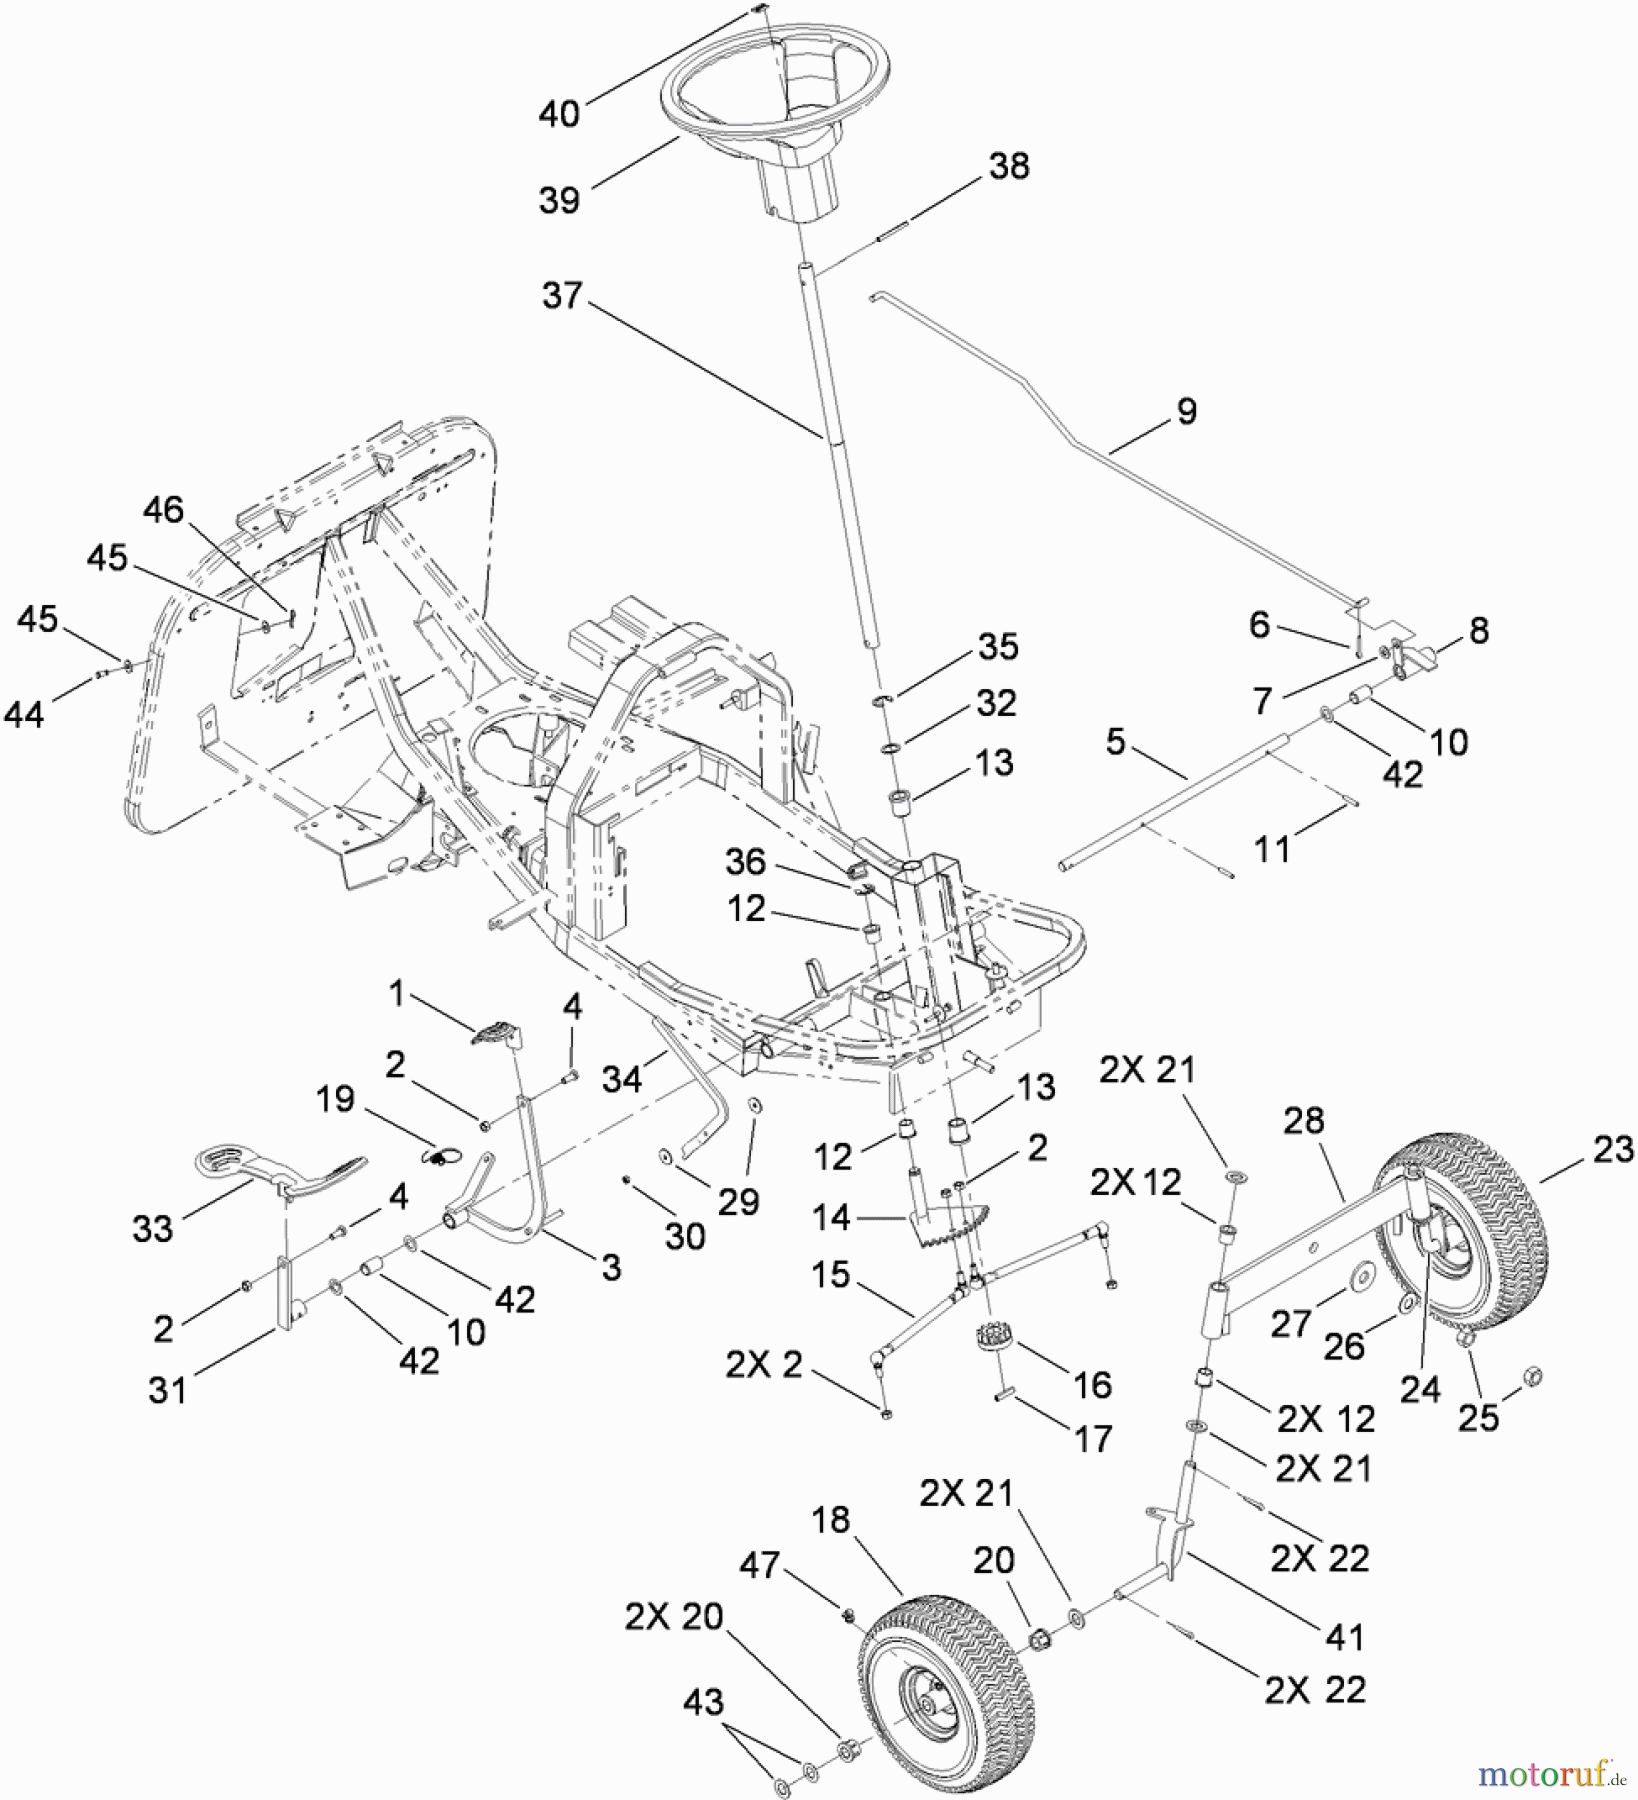  Toro Neu Mowers, Rear-Engine Rider 70186 (H132) - Toro H132 Rear-Engine Riding Mower, 2011 (311000001-311999999) FRONT AXLE AND STEERING ASSEMBLY